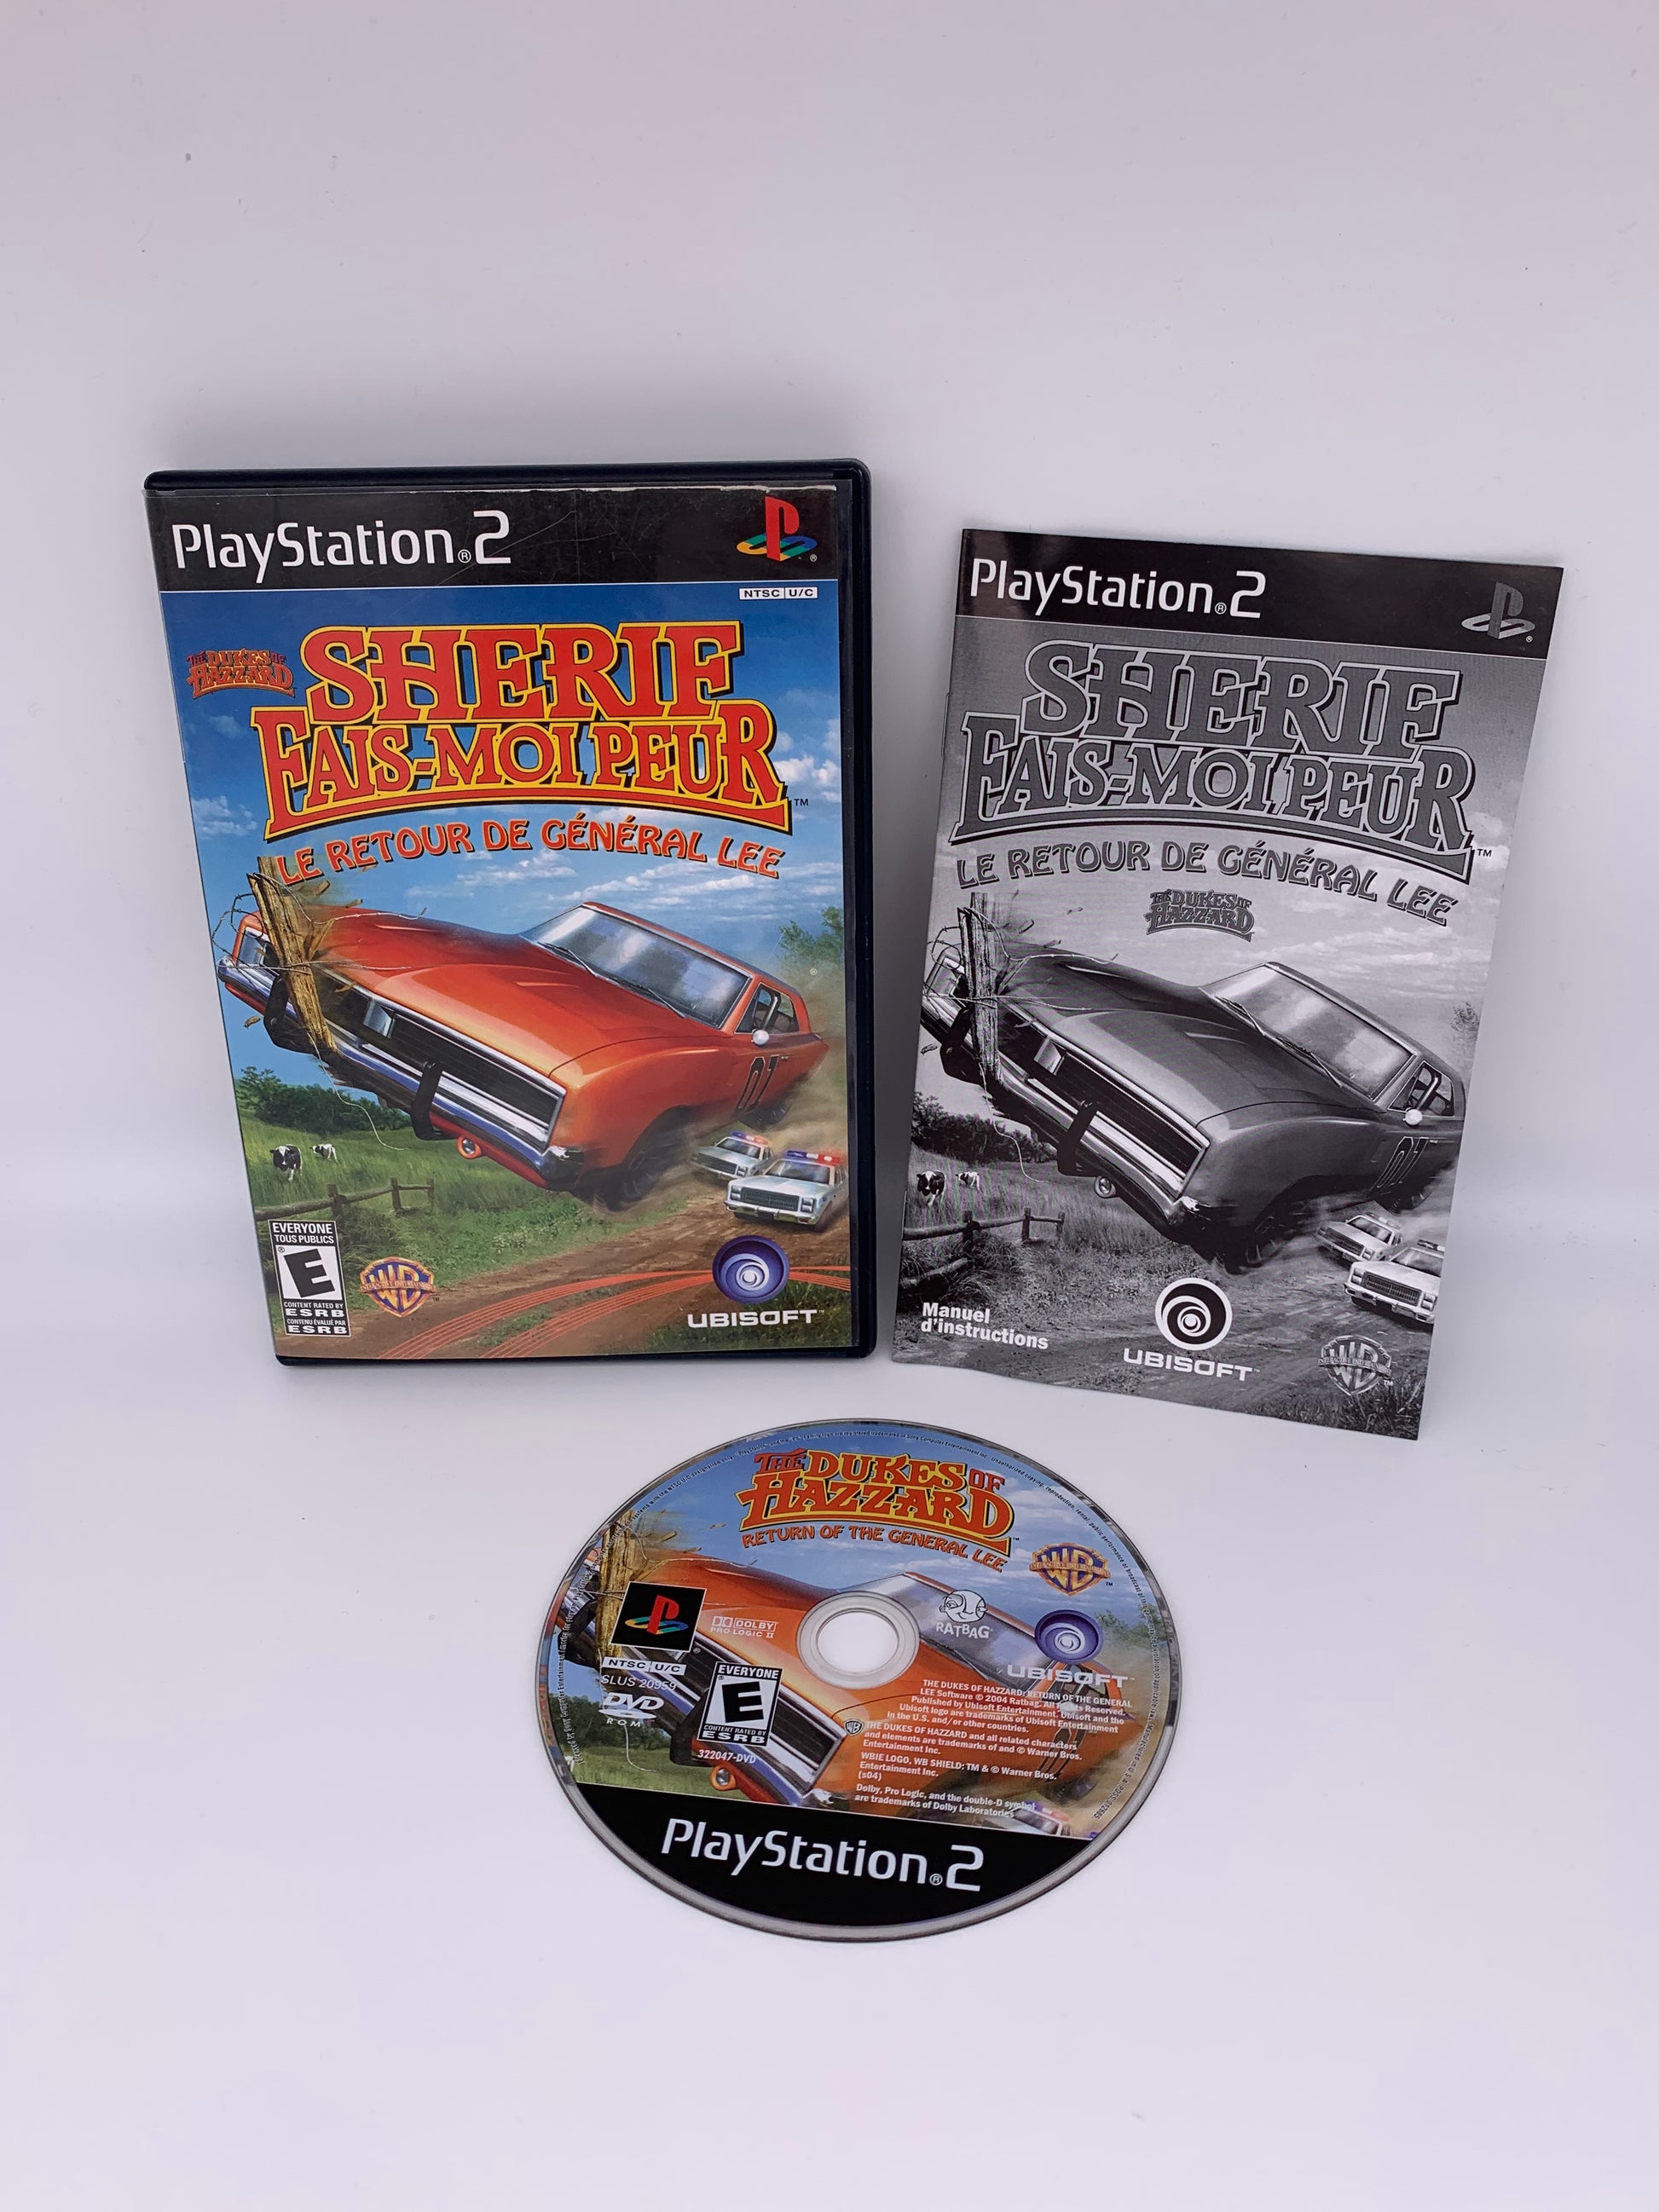 PiXEL-RETRO.COM : SONY PLAYSTATION 2 (PS2) COMPLET CIB BOX MANUAL GAME NTSC THE DUKES OF HAZZARD RETURN OF THE GENERAL LEE